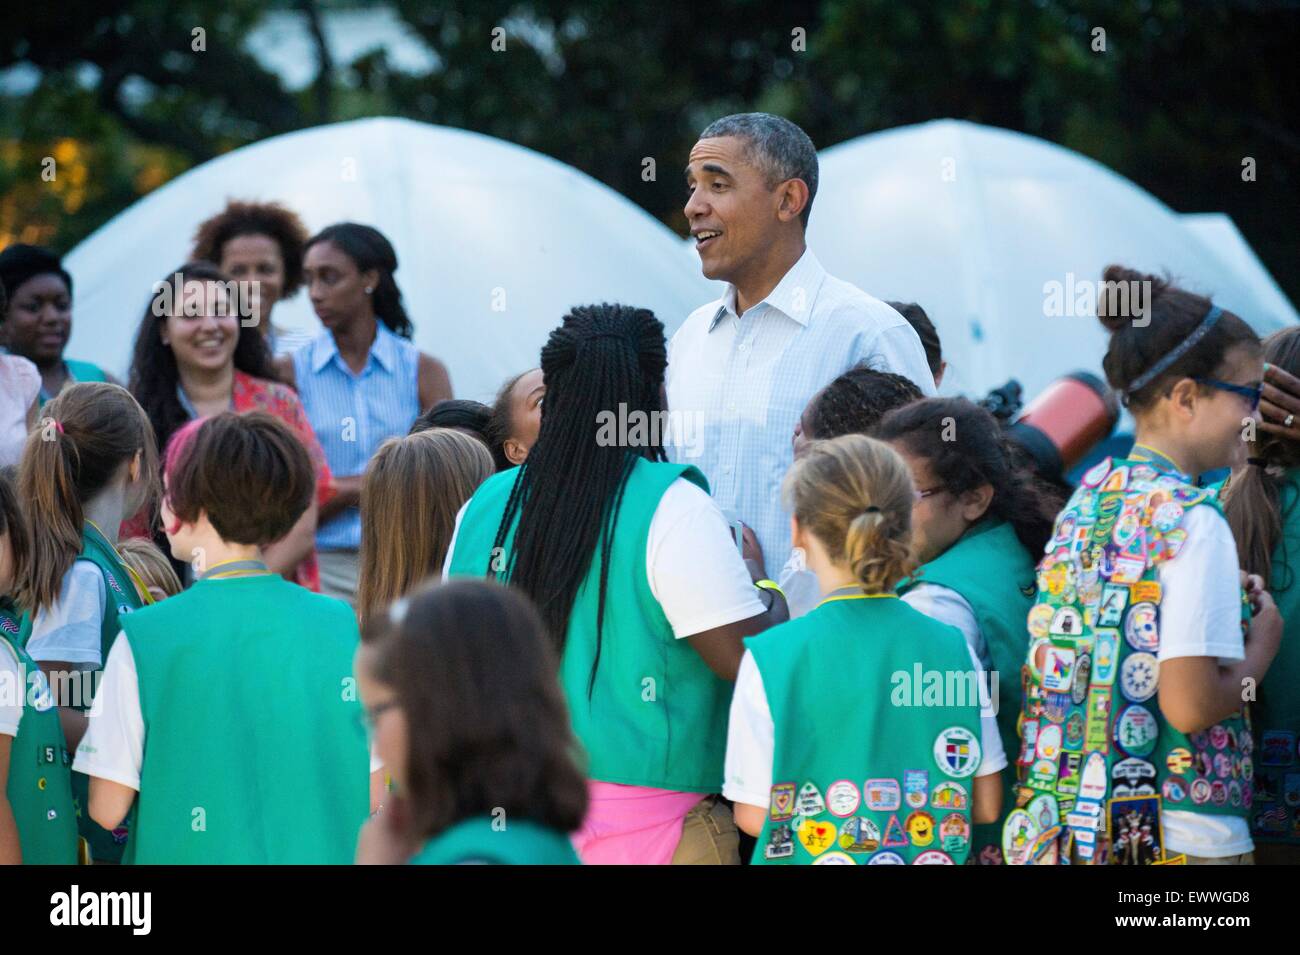 U.S. President Barack Obama talks with Girl Scouts during the first-ever White House Campout with fifty fourth-grade girls as part of the Let's Move! Outside initiative on the South Lawn of the White House June 30, 2015 in Washington, DC. In addition to the campout the girls enjoyed stargazing activity with scientists and astronaut Cady Coleman. Stock Photo